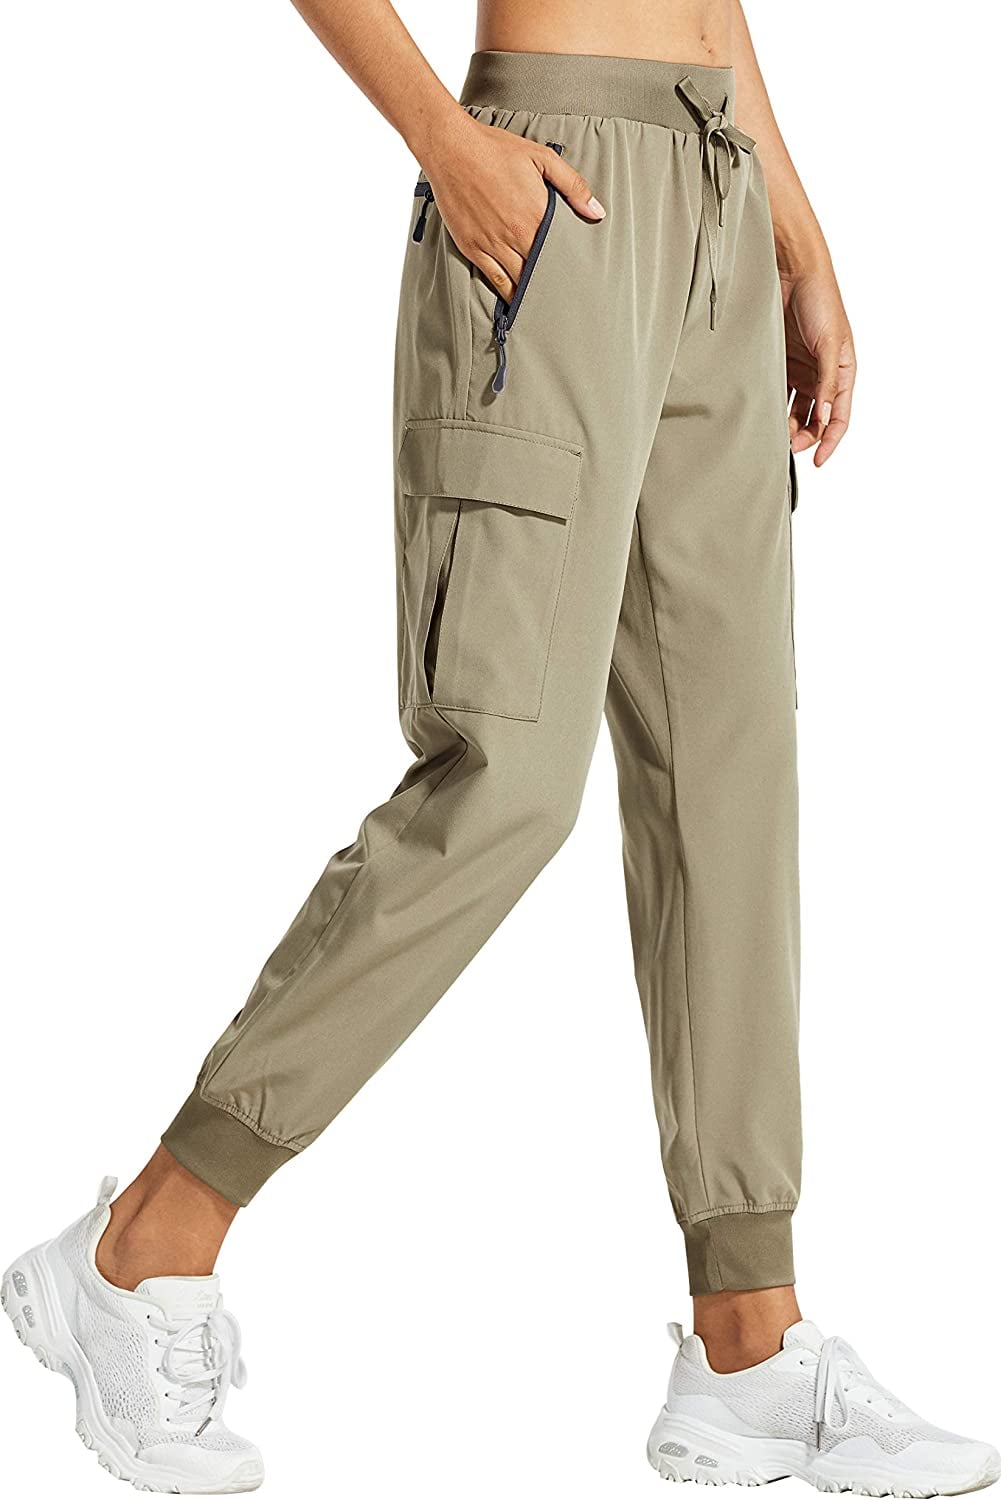 17 Pairs Of The Most Comfortable Pants